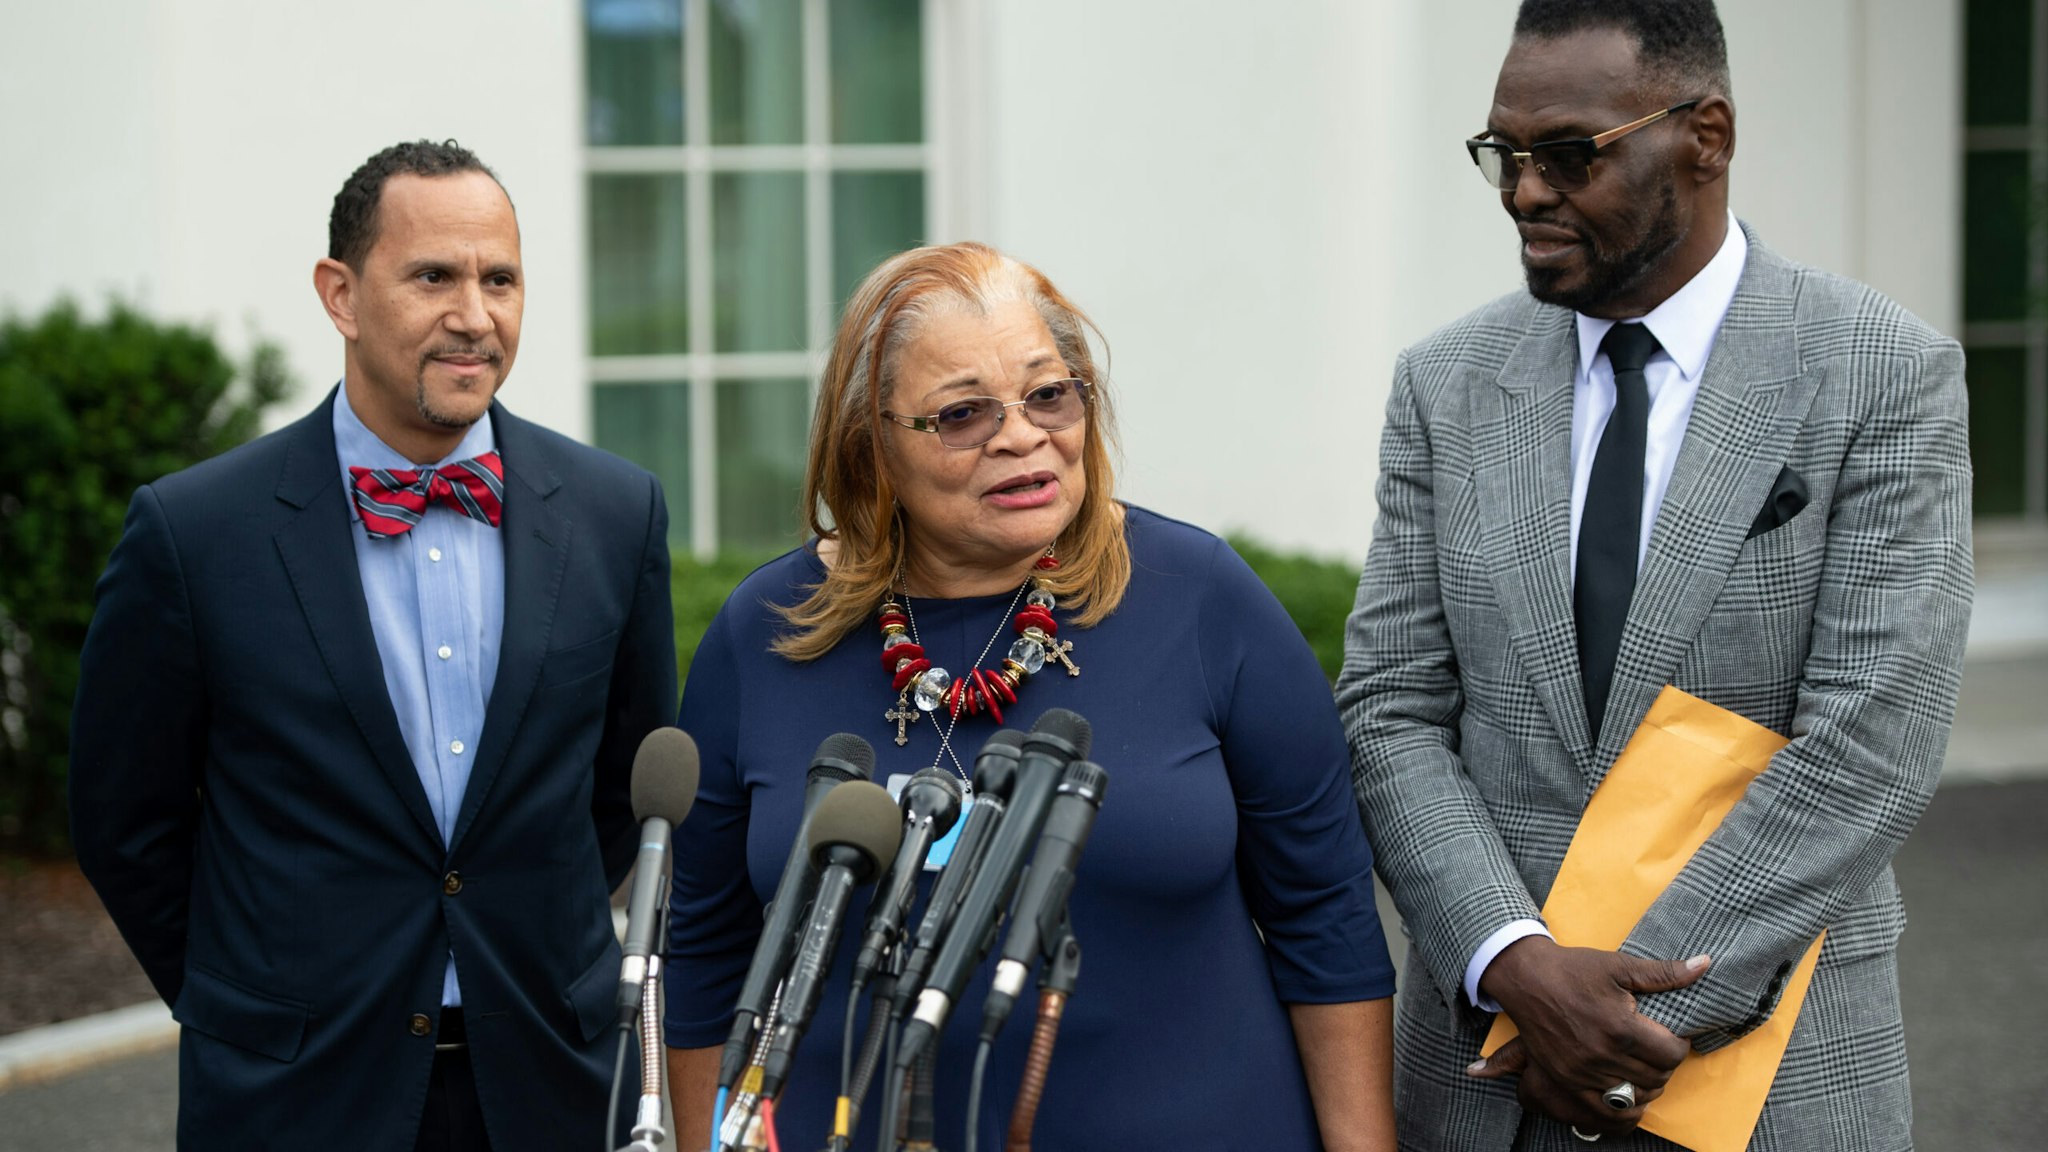 Alveda King (C), niece of Dr. Martin Luther King Jr., speaks following a meeting with US President Donald Trump and other faith-based inner-city leaders at the White House in Washington, DC on July 29, 2019.